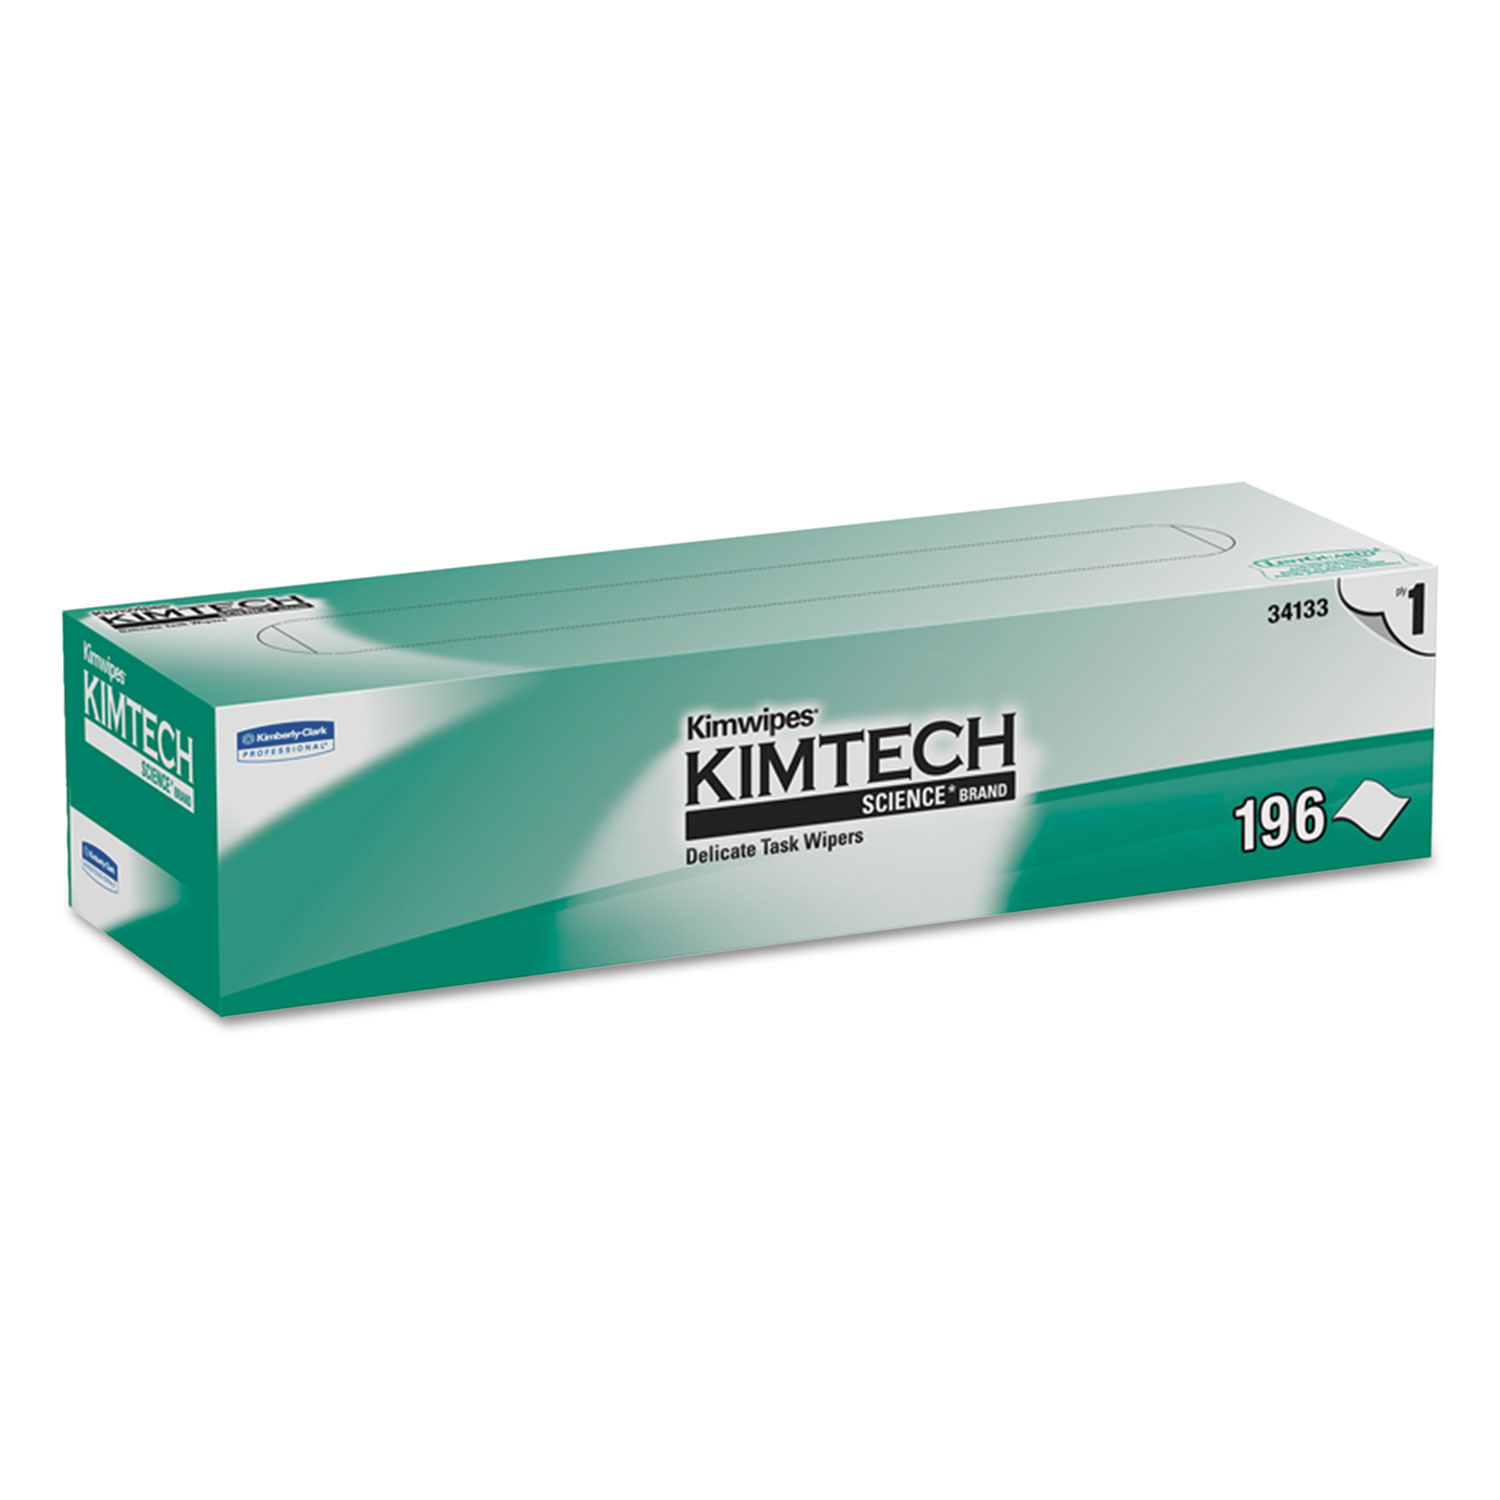 60 Boxes Kimtech 34155 KimWipes Delicate Task Wipers KCC34155CT 